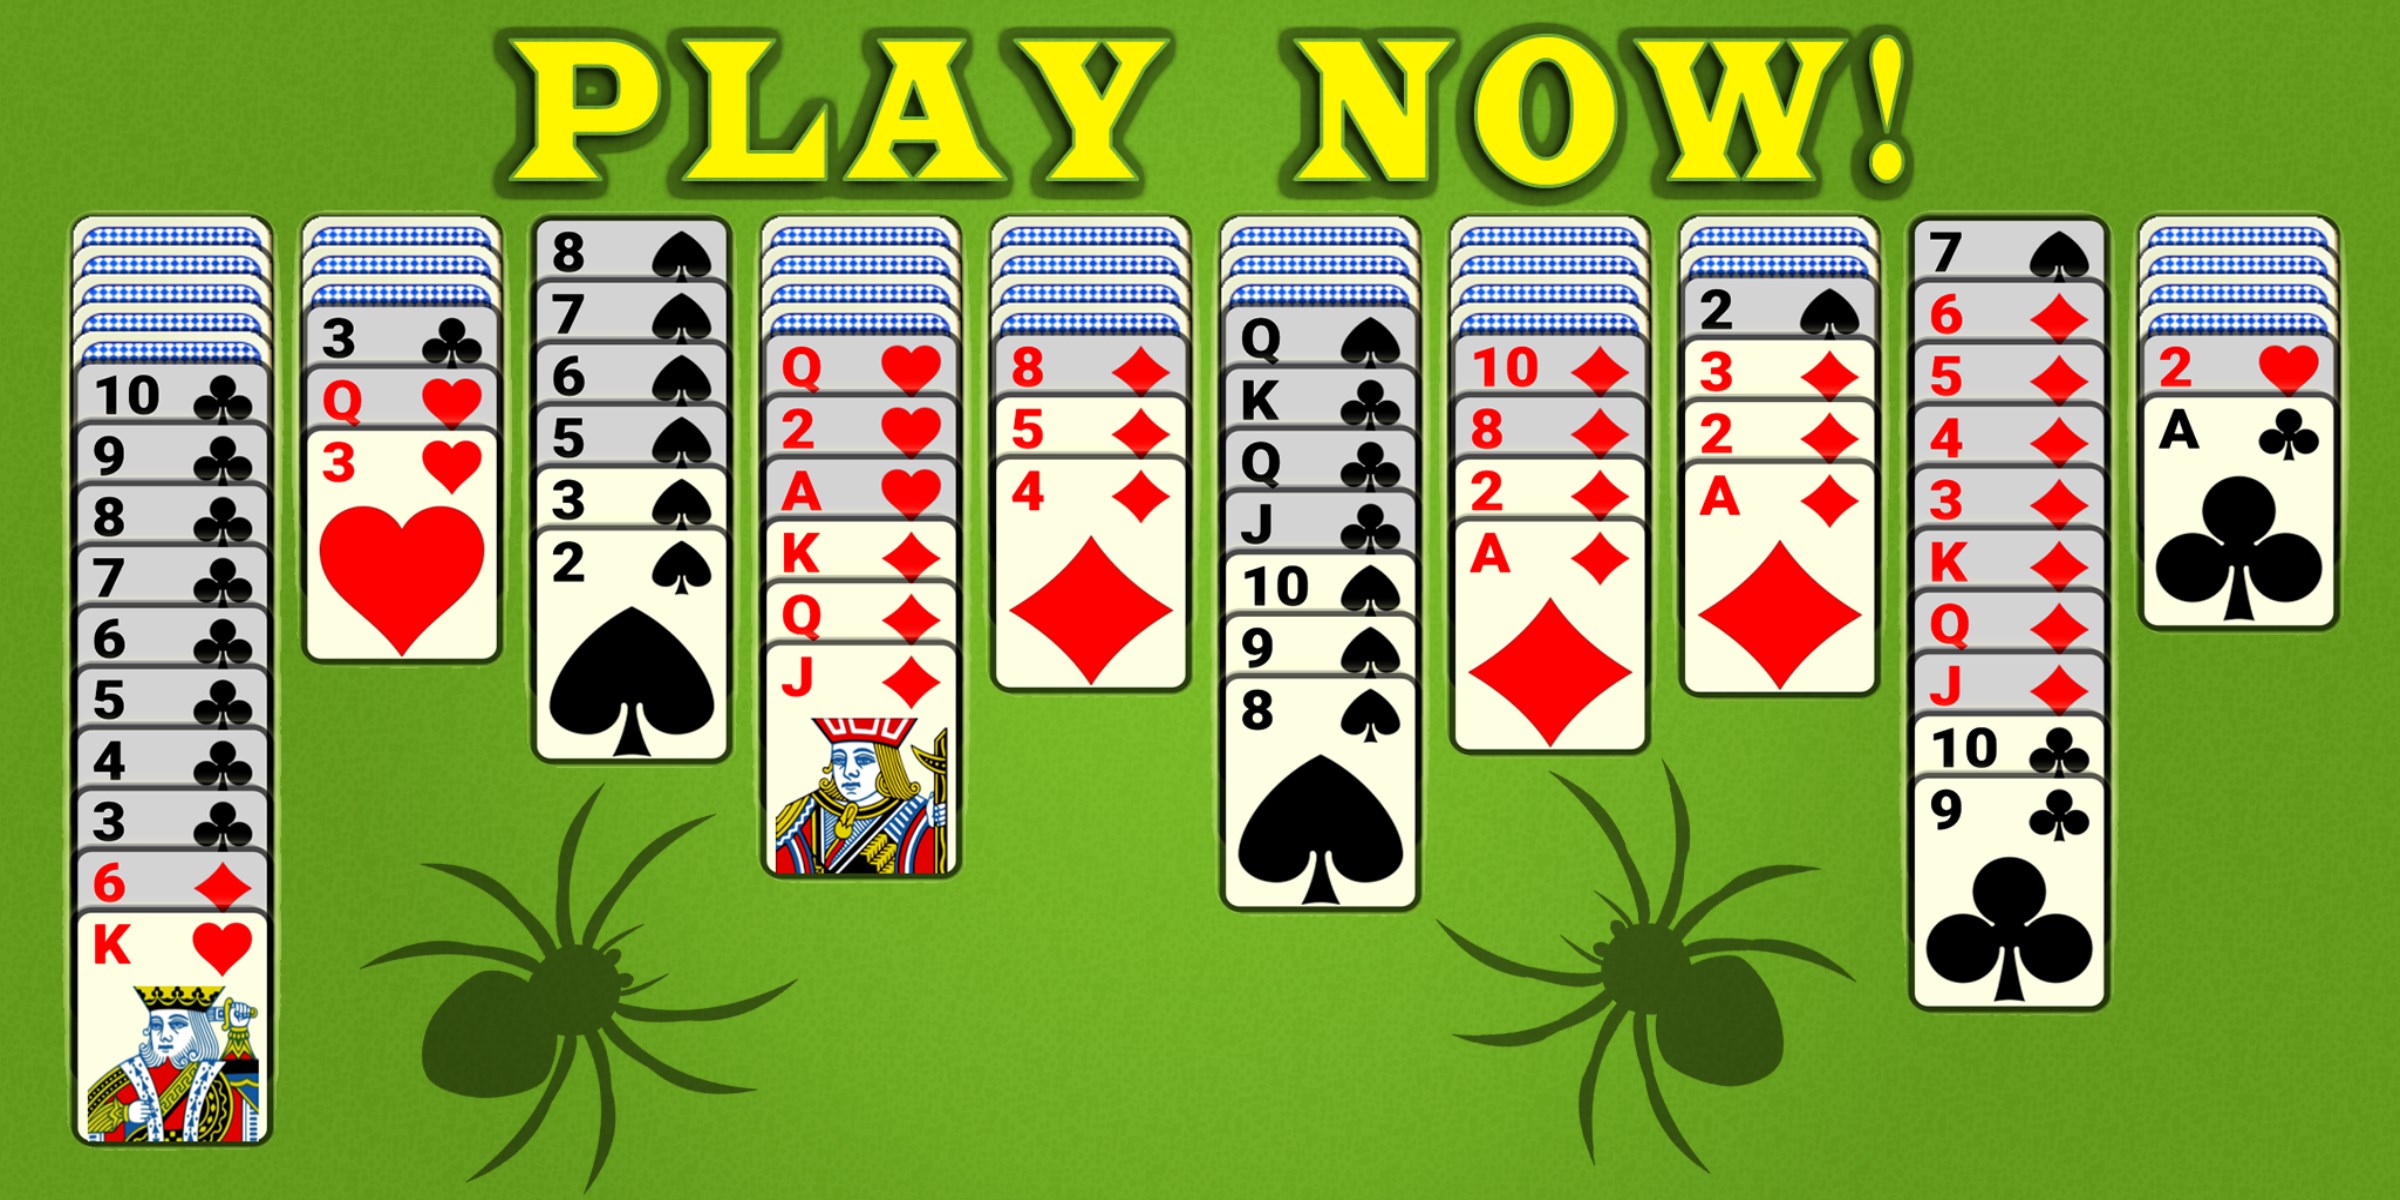 spider solitaire for windows 10 without ads